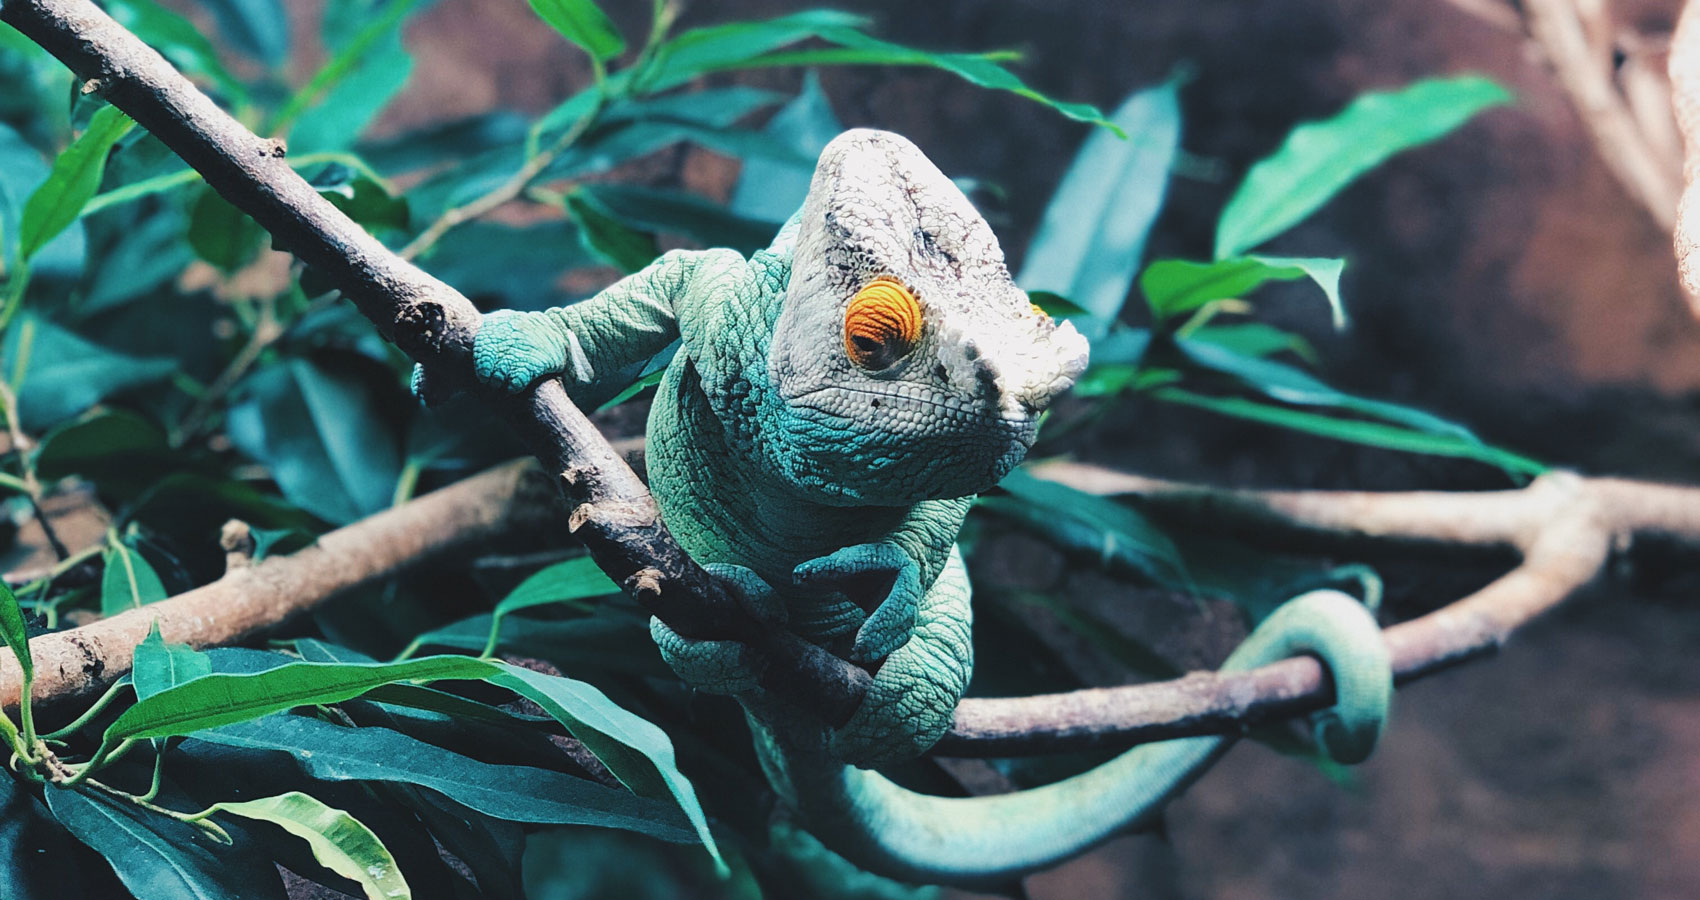 Chameleon Stereotypes, poetry written by Tinashe Muza at Spillwords.com